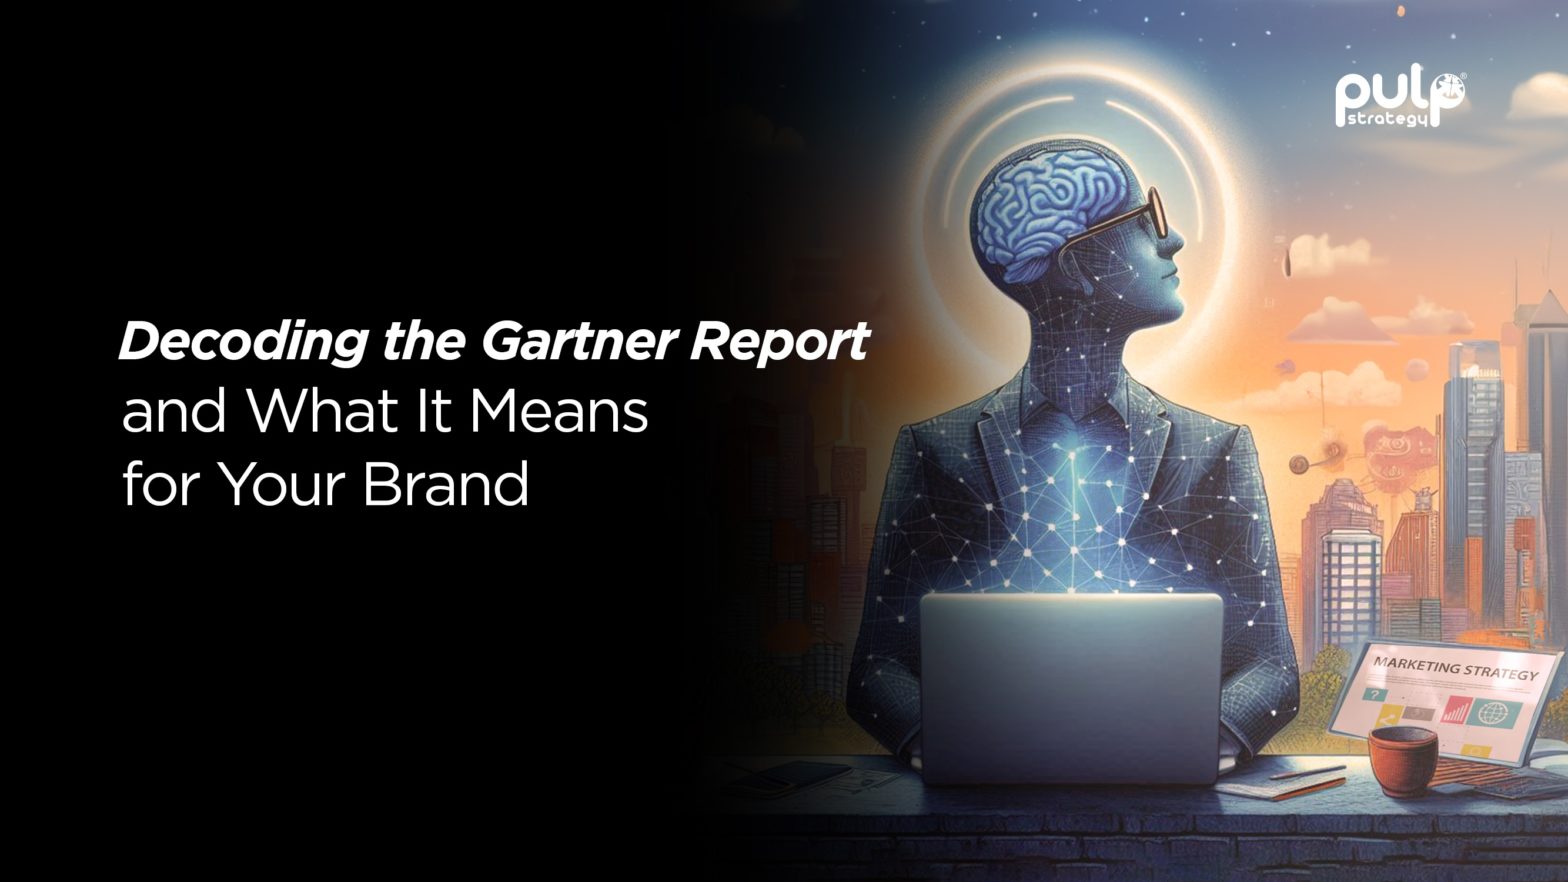 Decoding the Gartner Report and What It Means for Your Brand